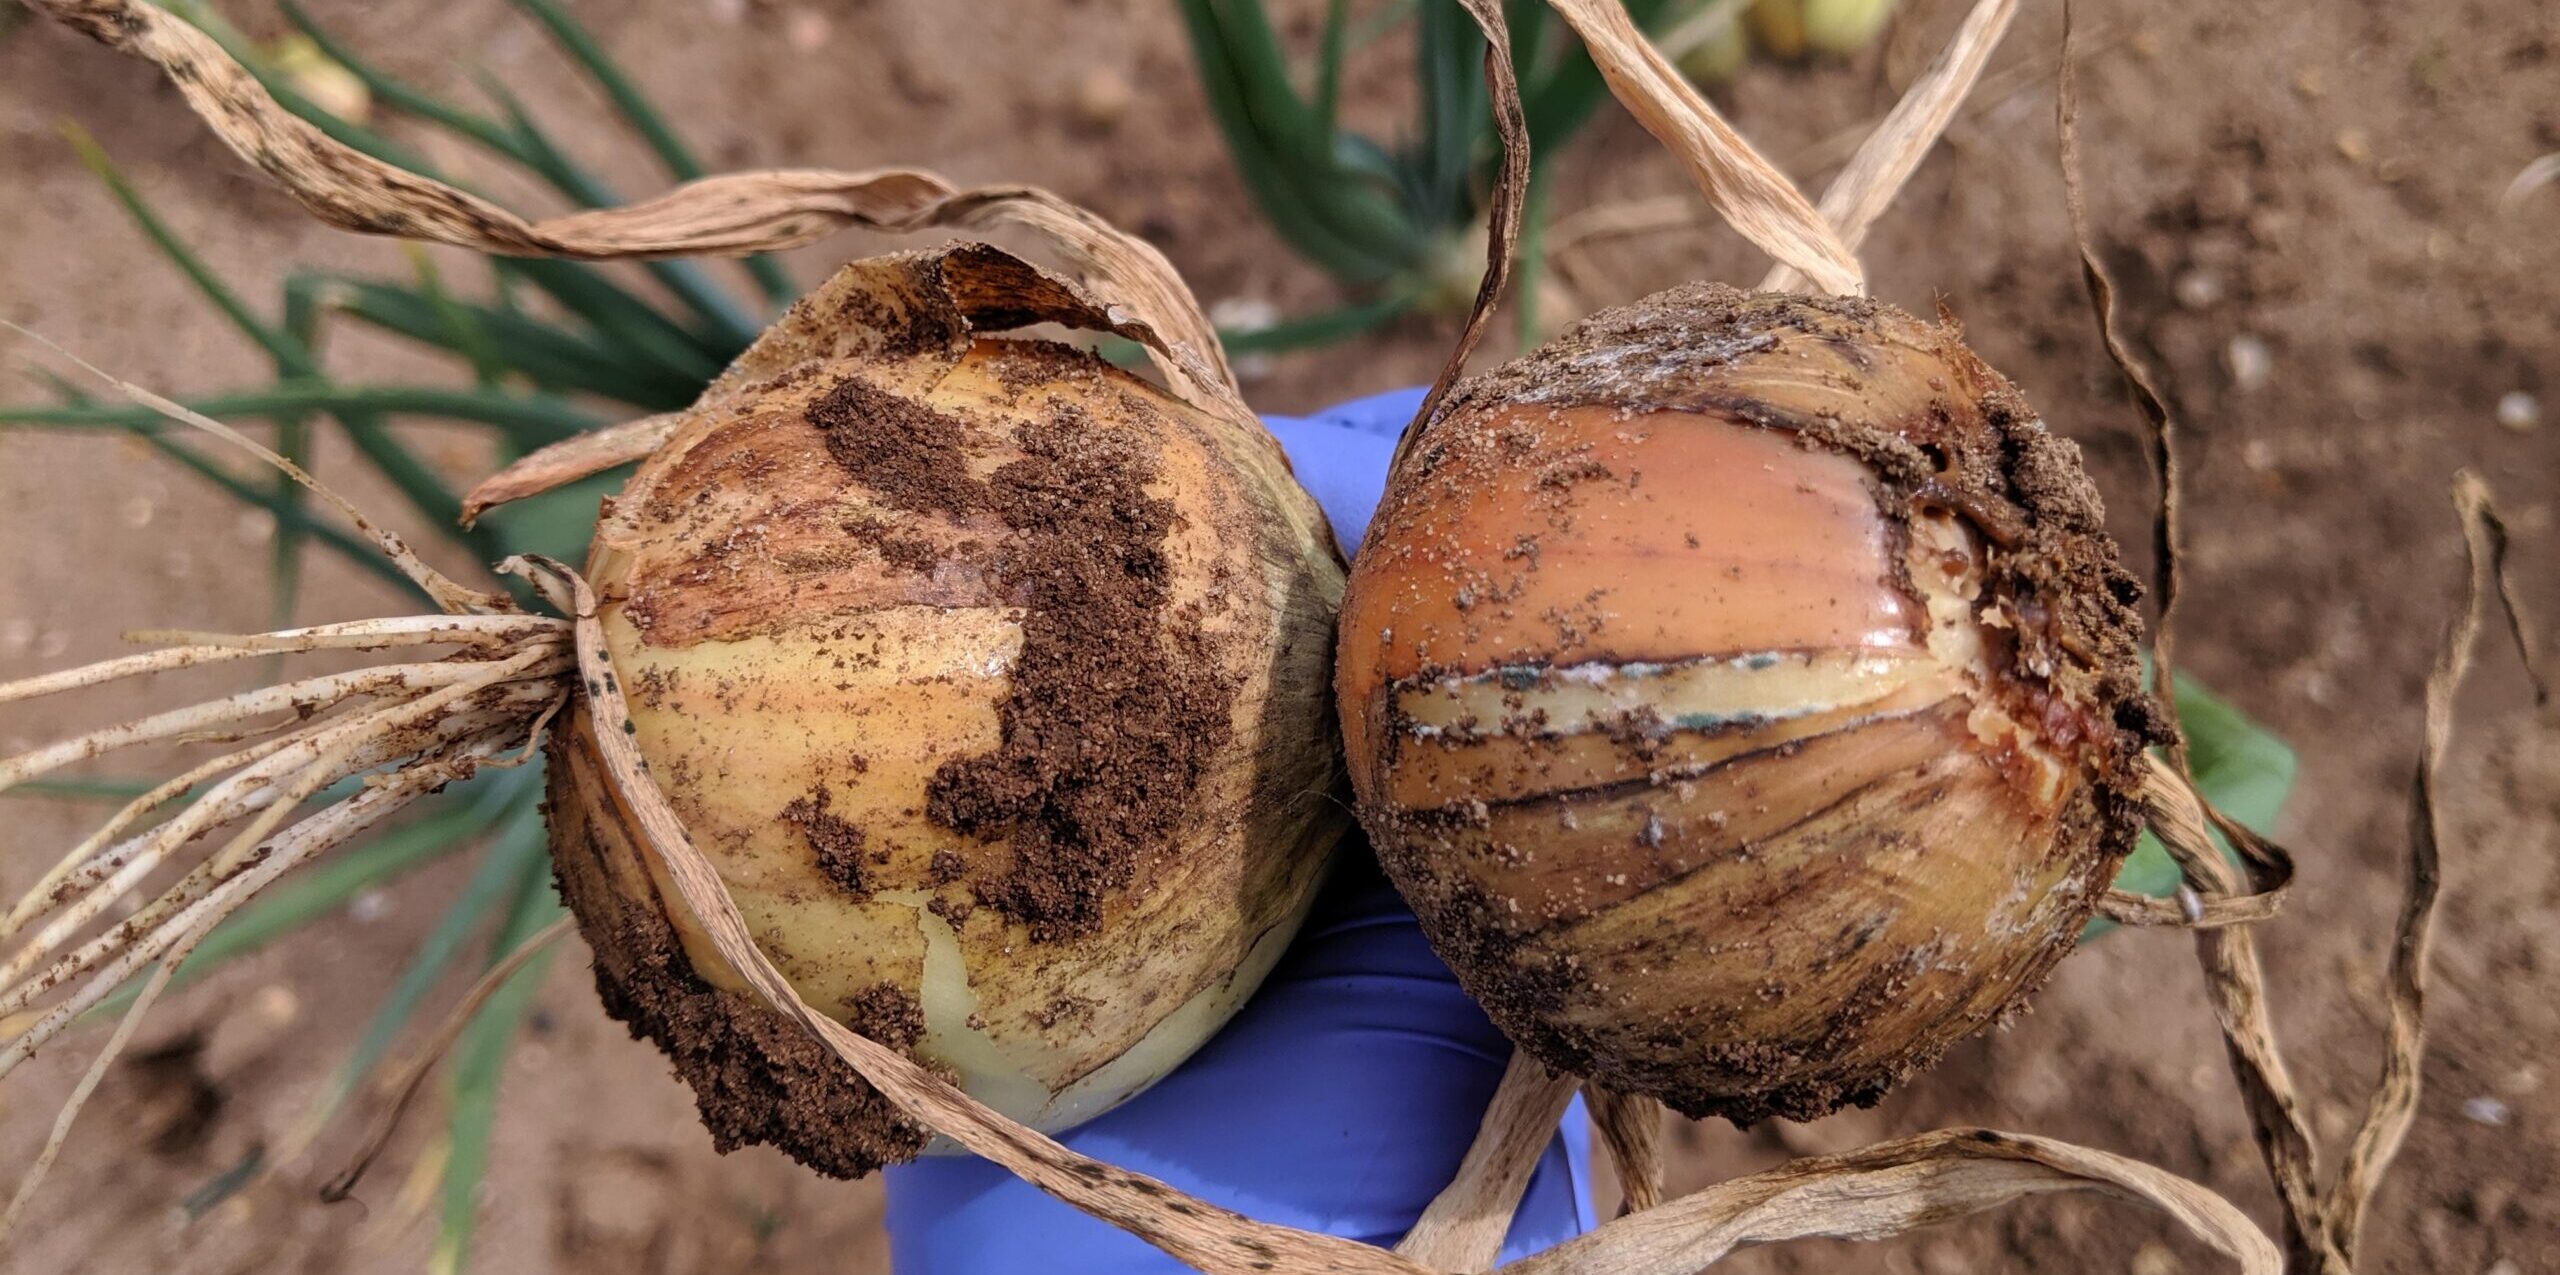 Combating Fusarium Basal Rot (FBR) in onion cultivation